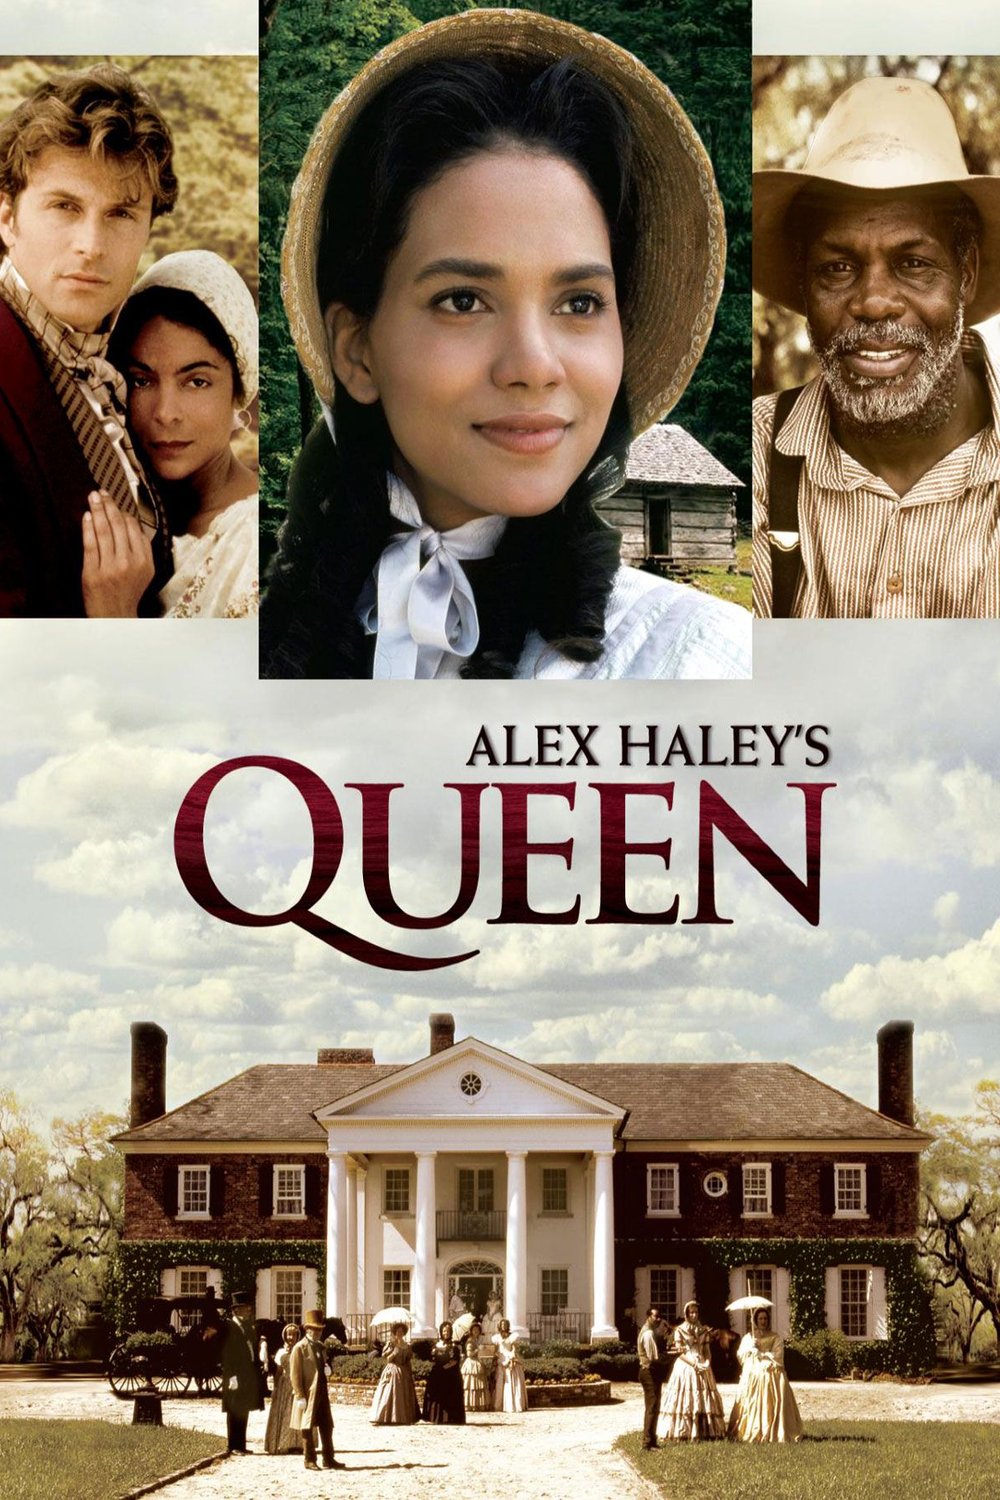 Poster of the movie Queen